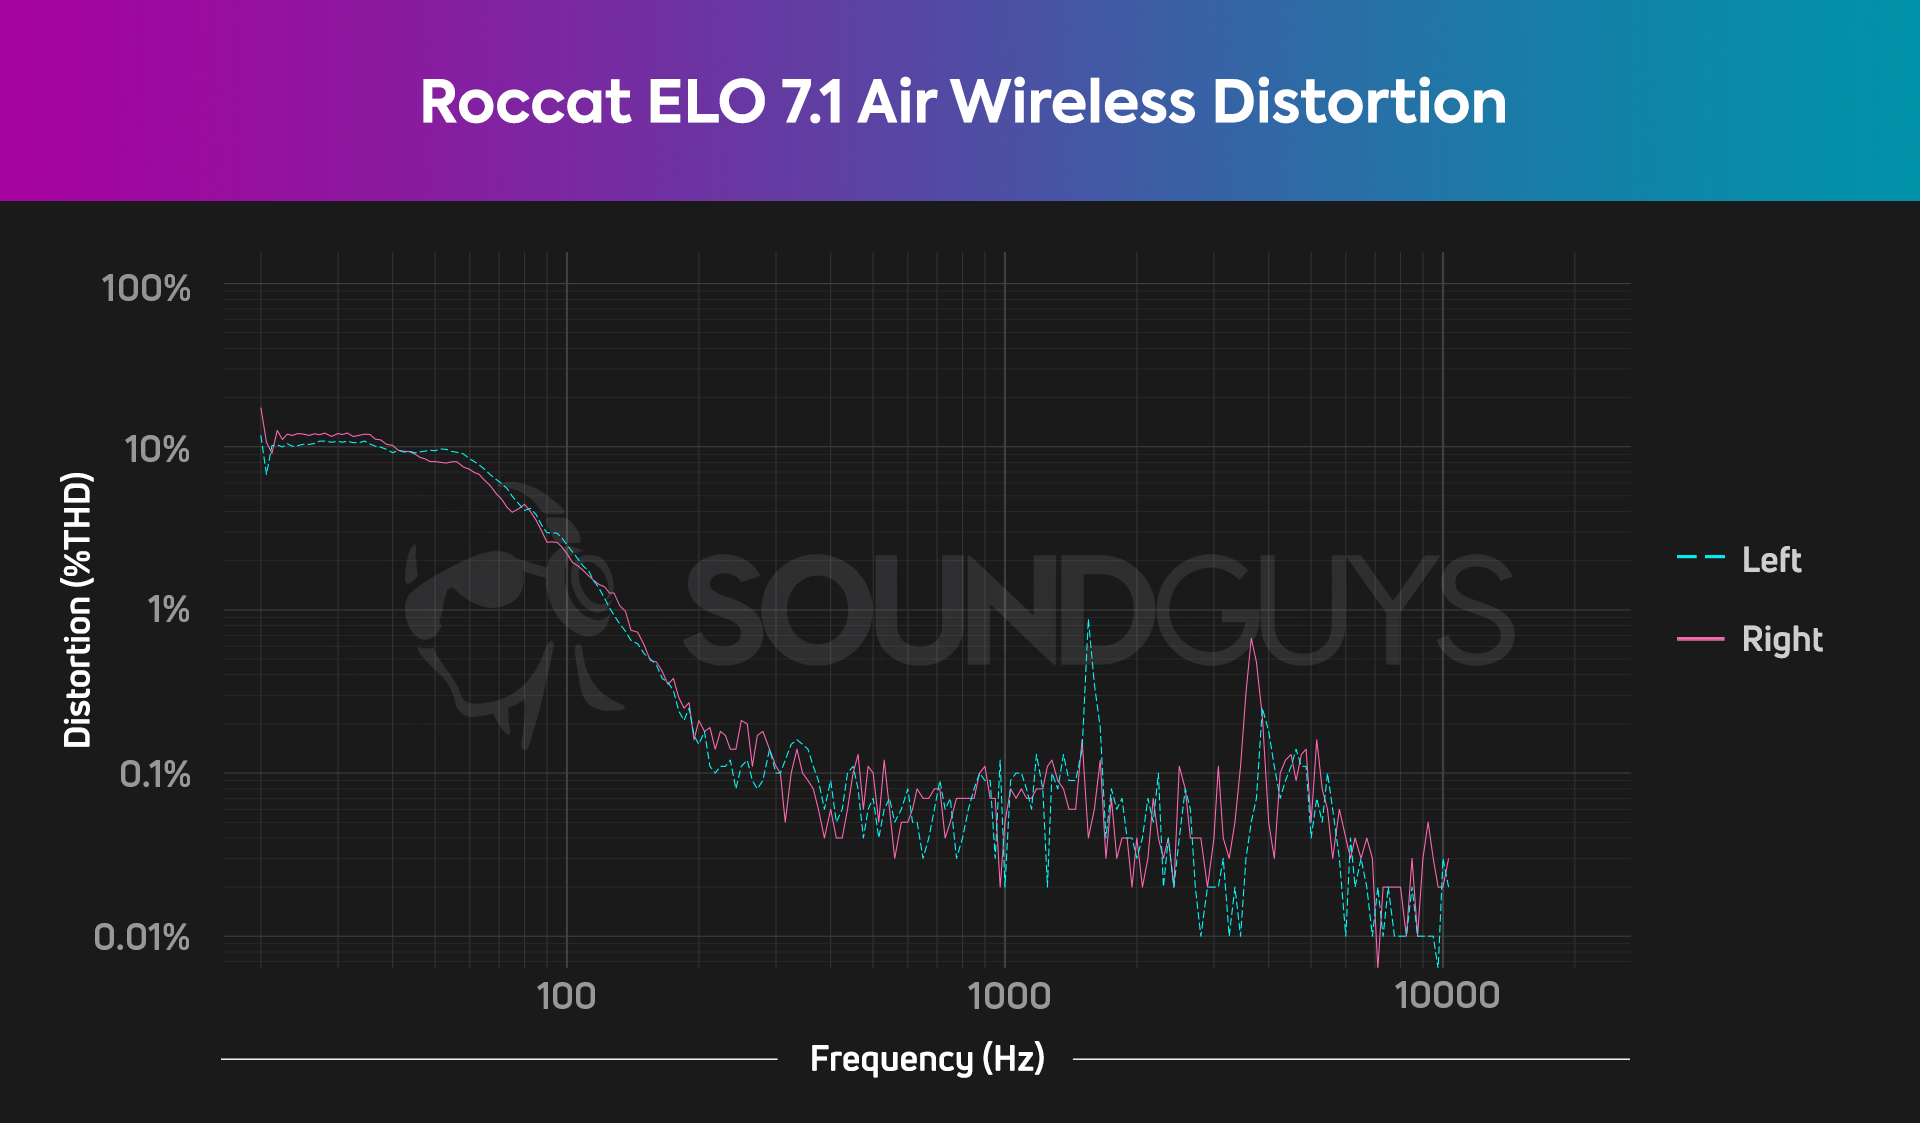 Total Harmonic Distortion chart for the Roccat HLO 7.1 Air Wireless